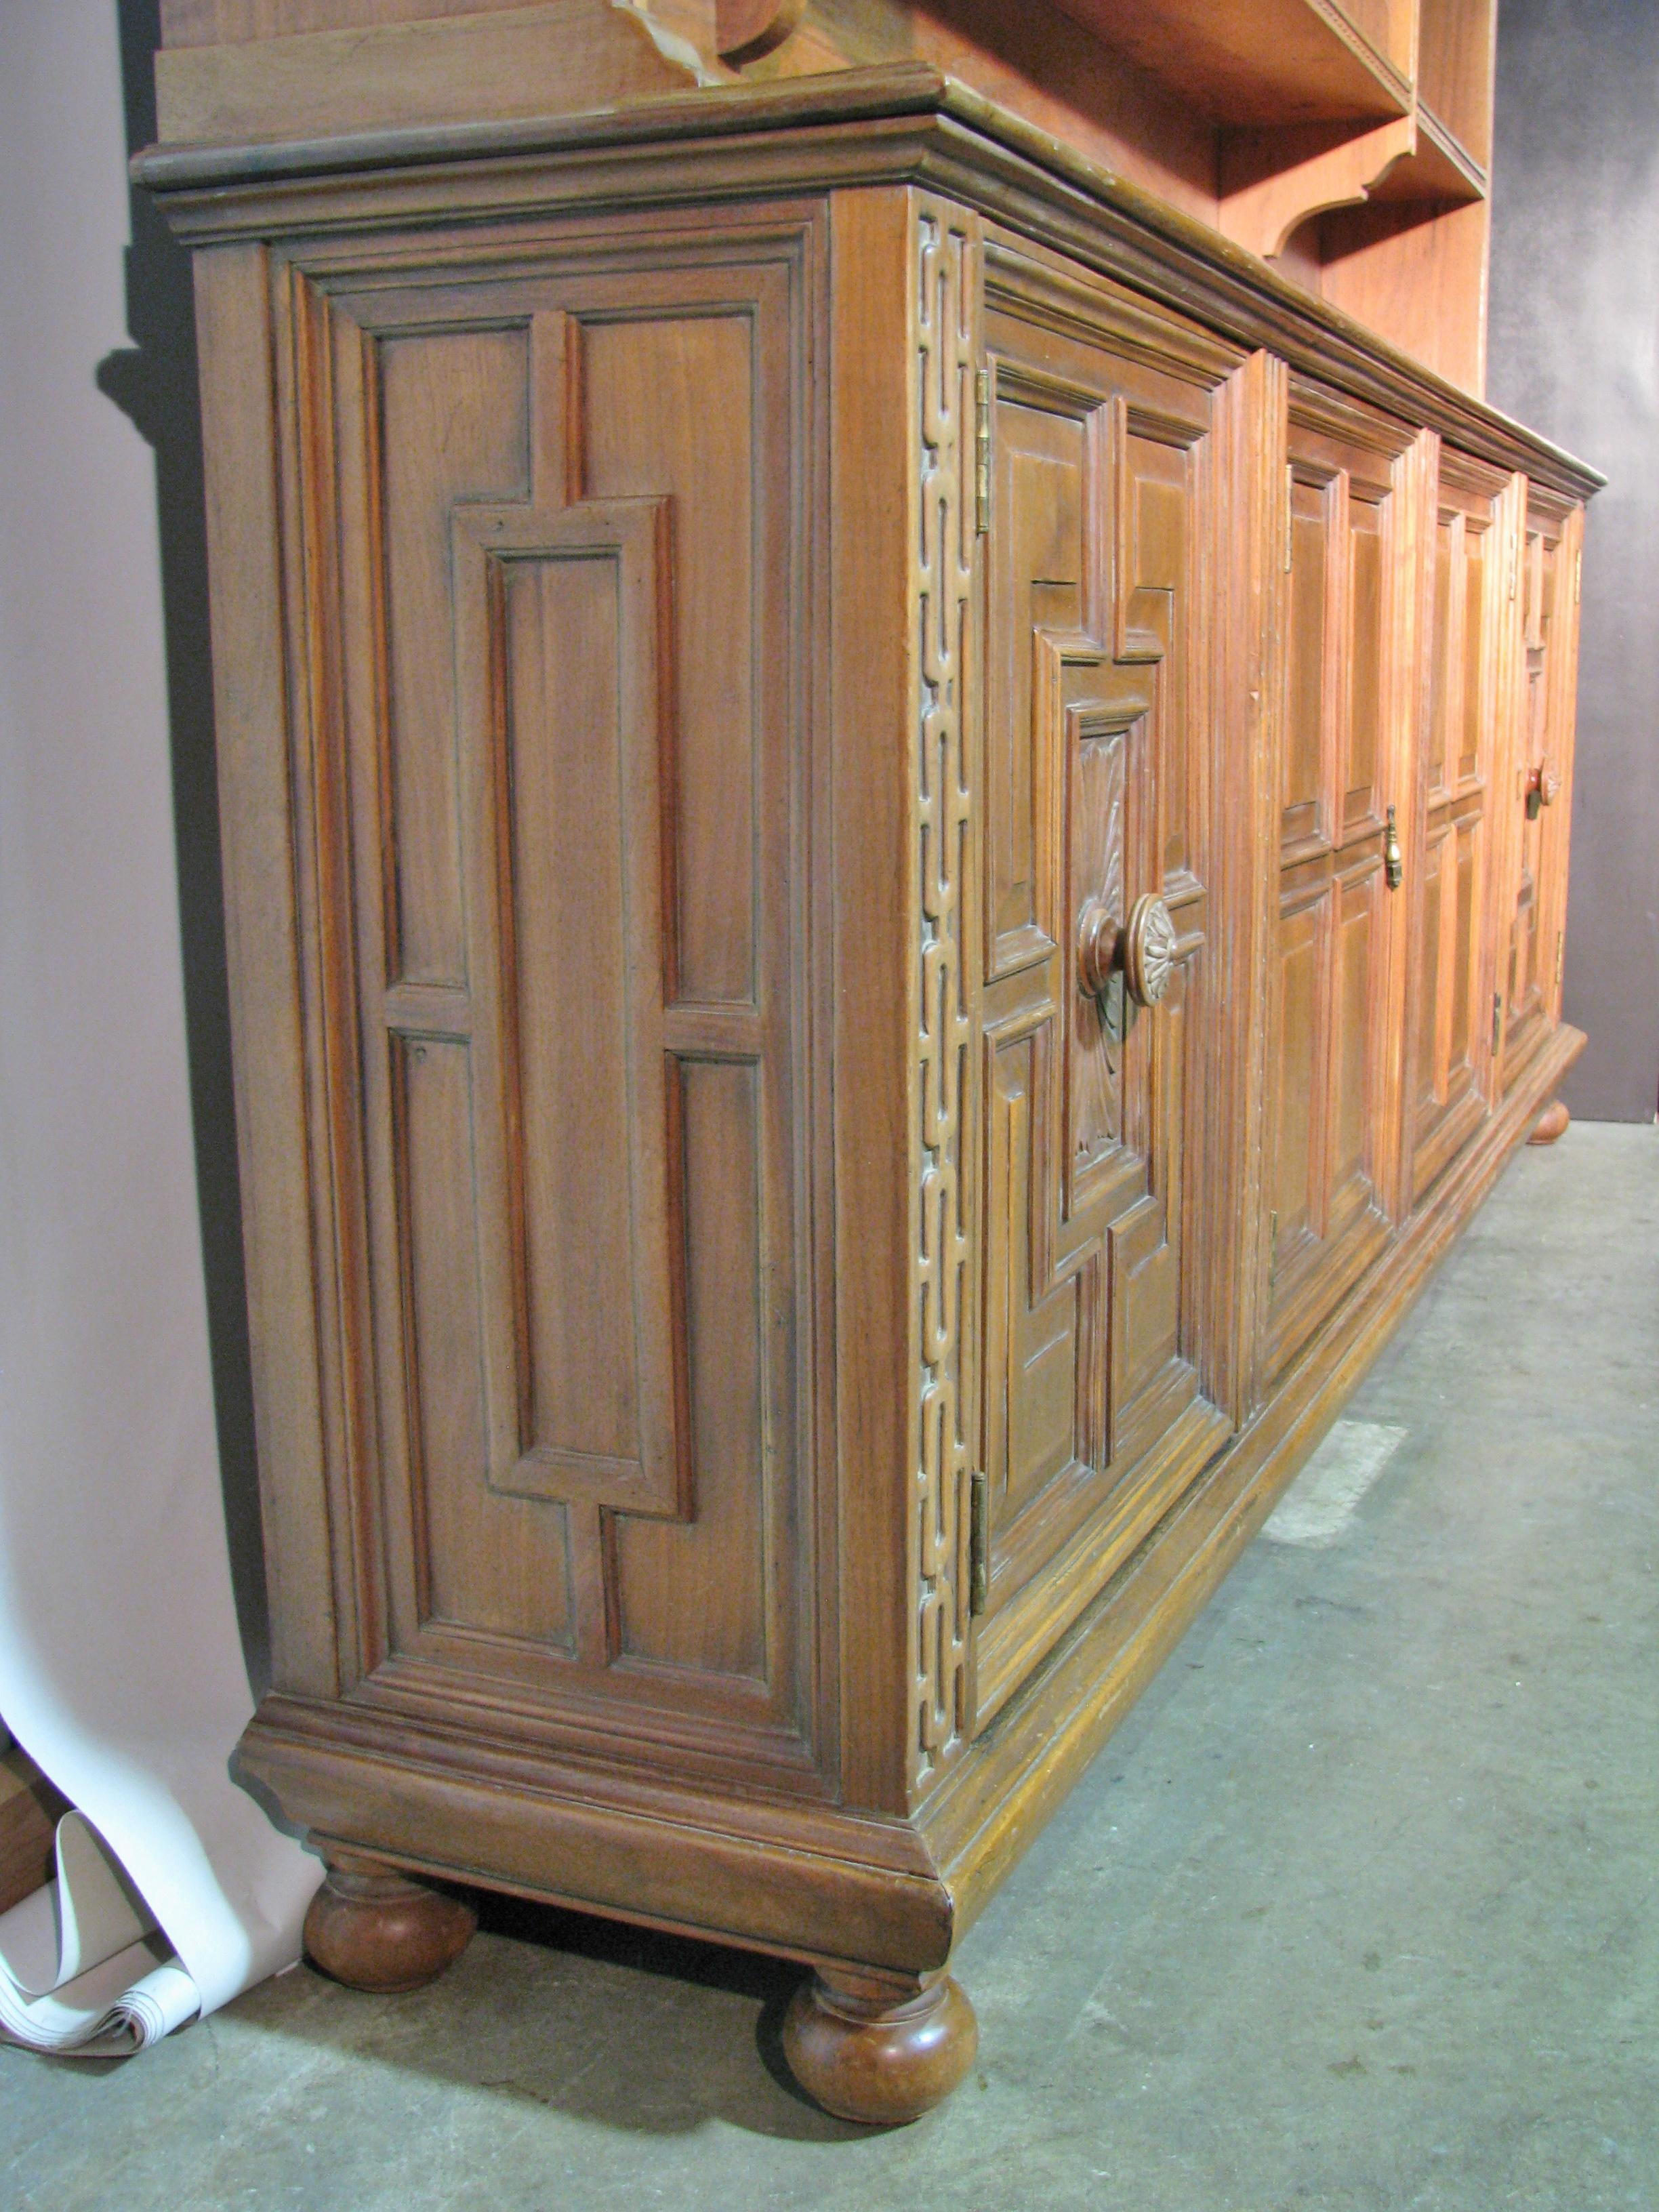 American High End Italian Renaissance Style Walnut Cabinet & Shelves by Joseph Milbeck For Sale